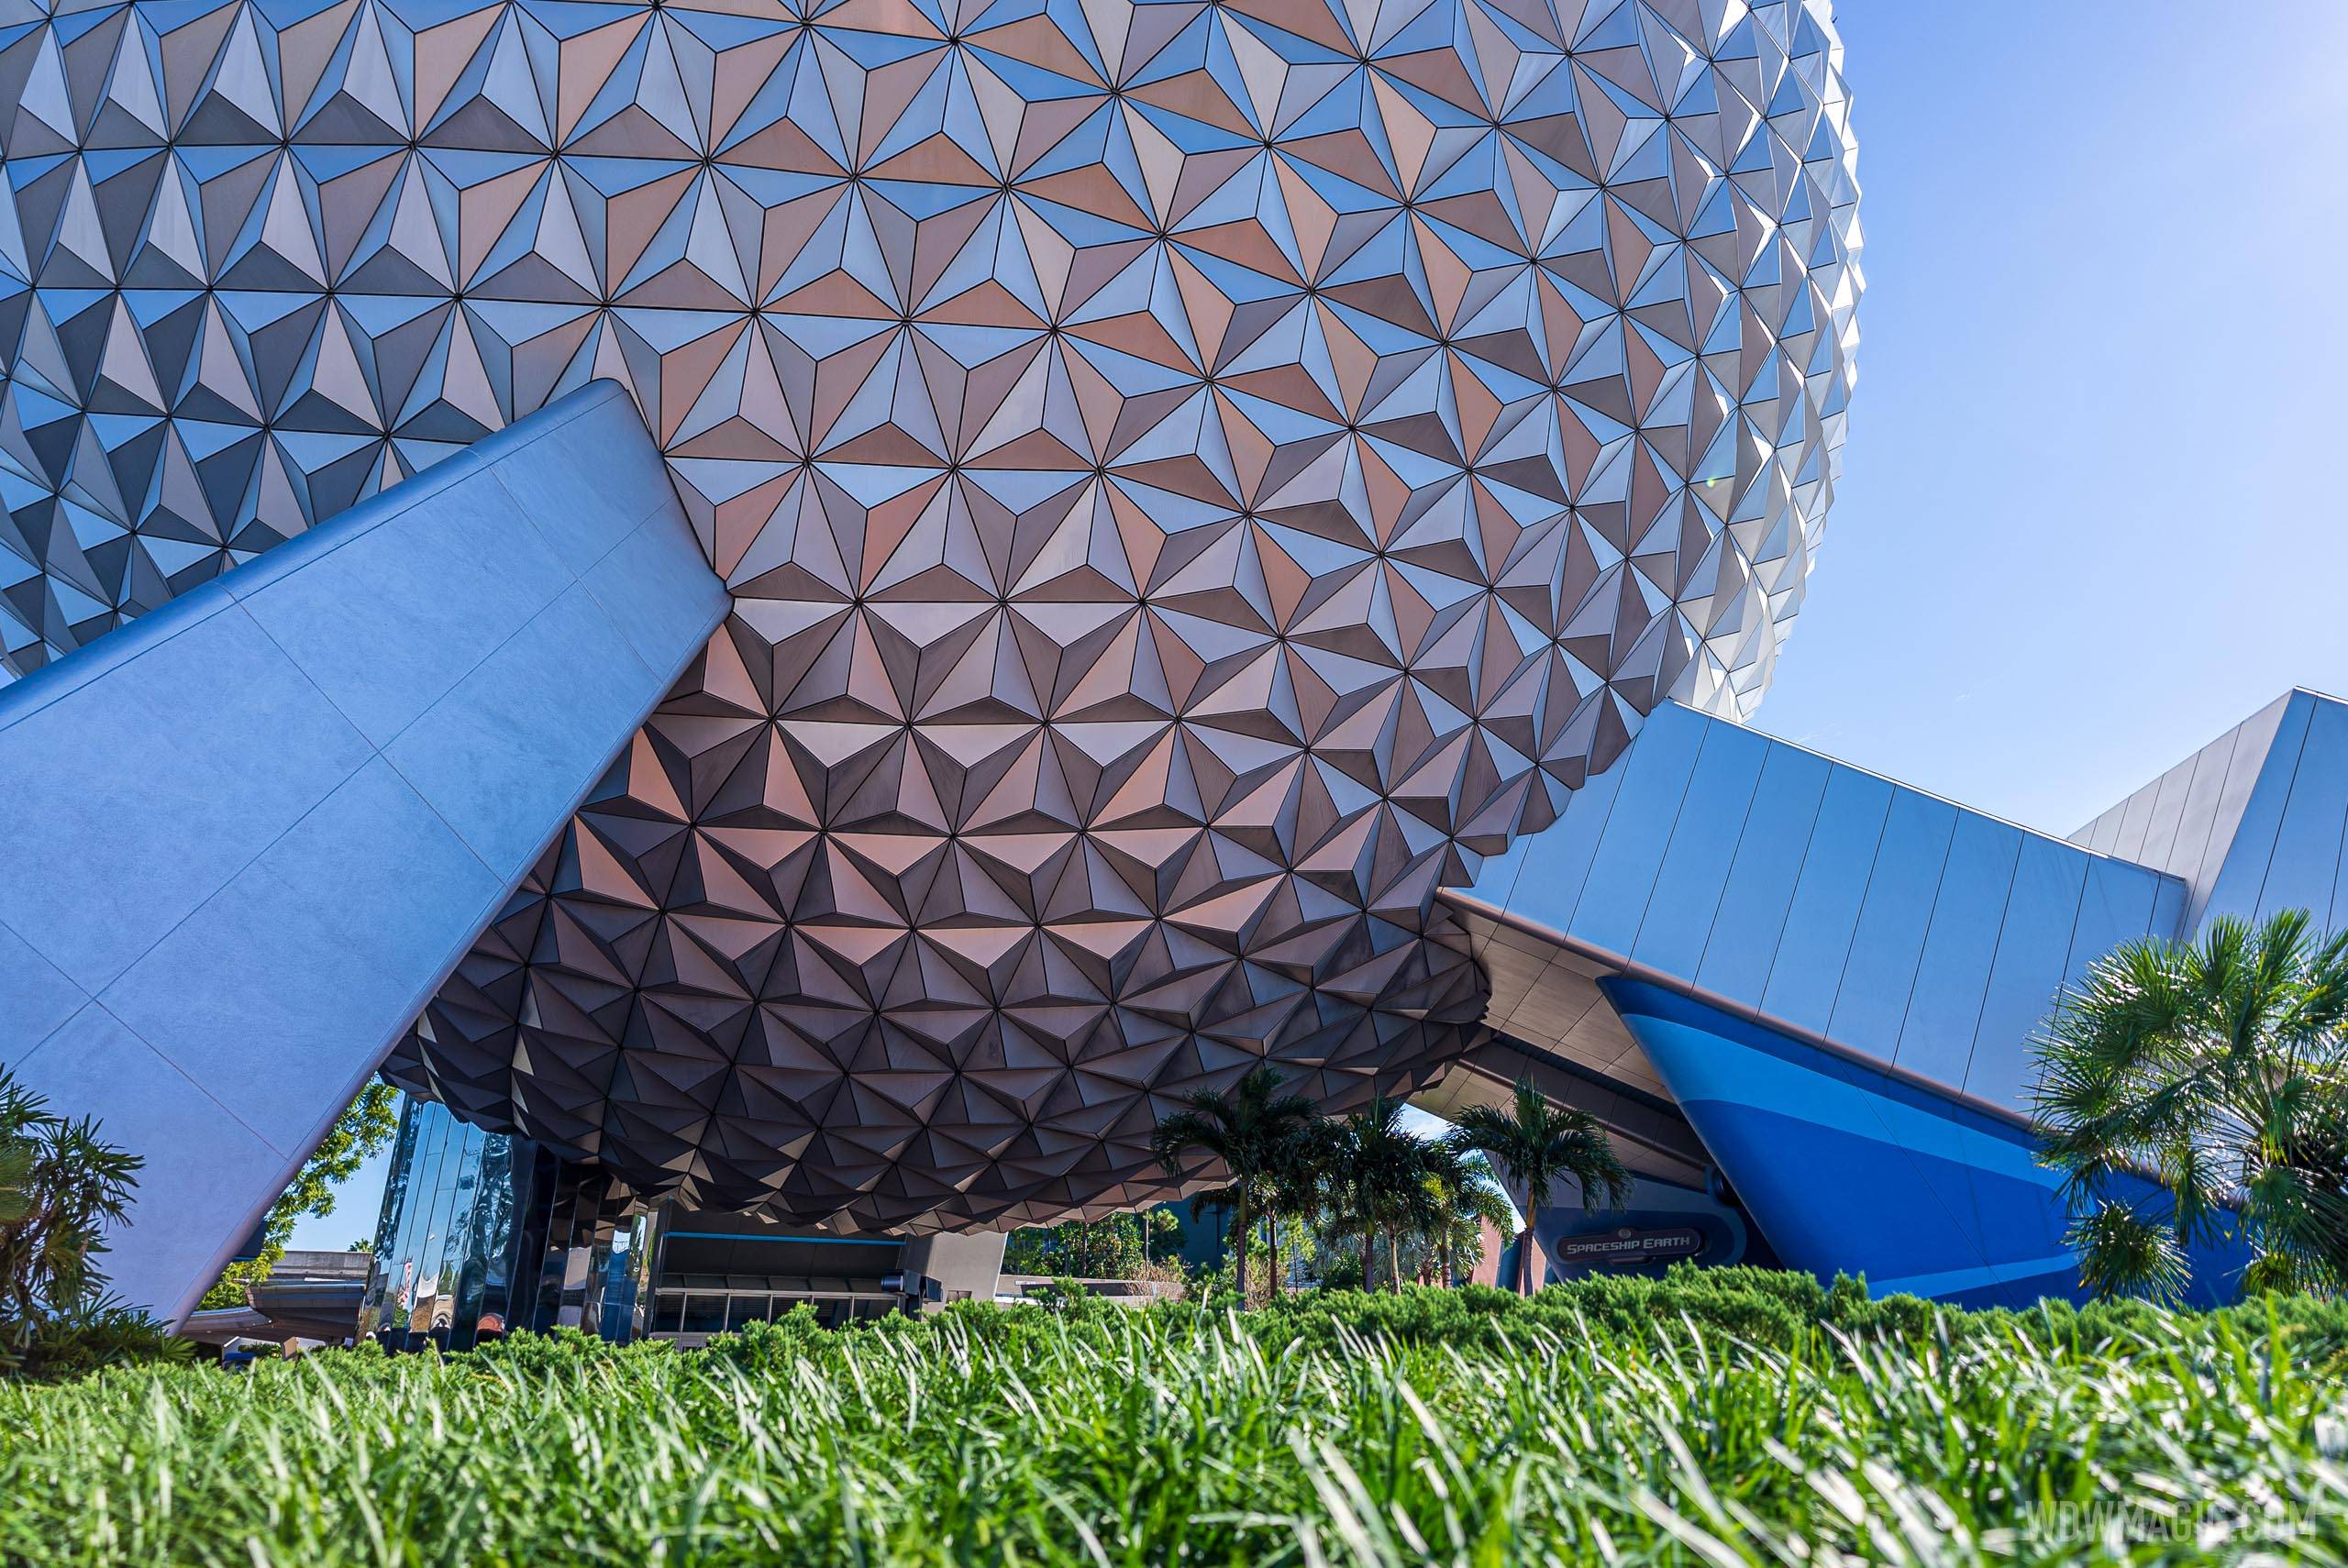 Updates to Spaceship Earth confirmed as part of Epcot's redevelopment